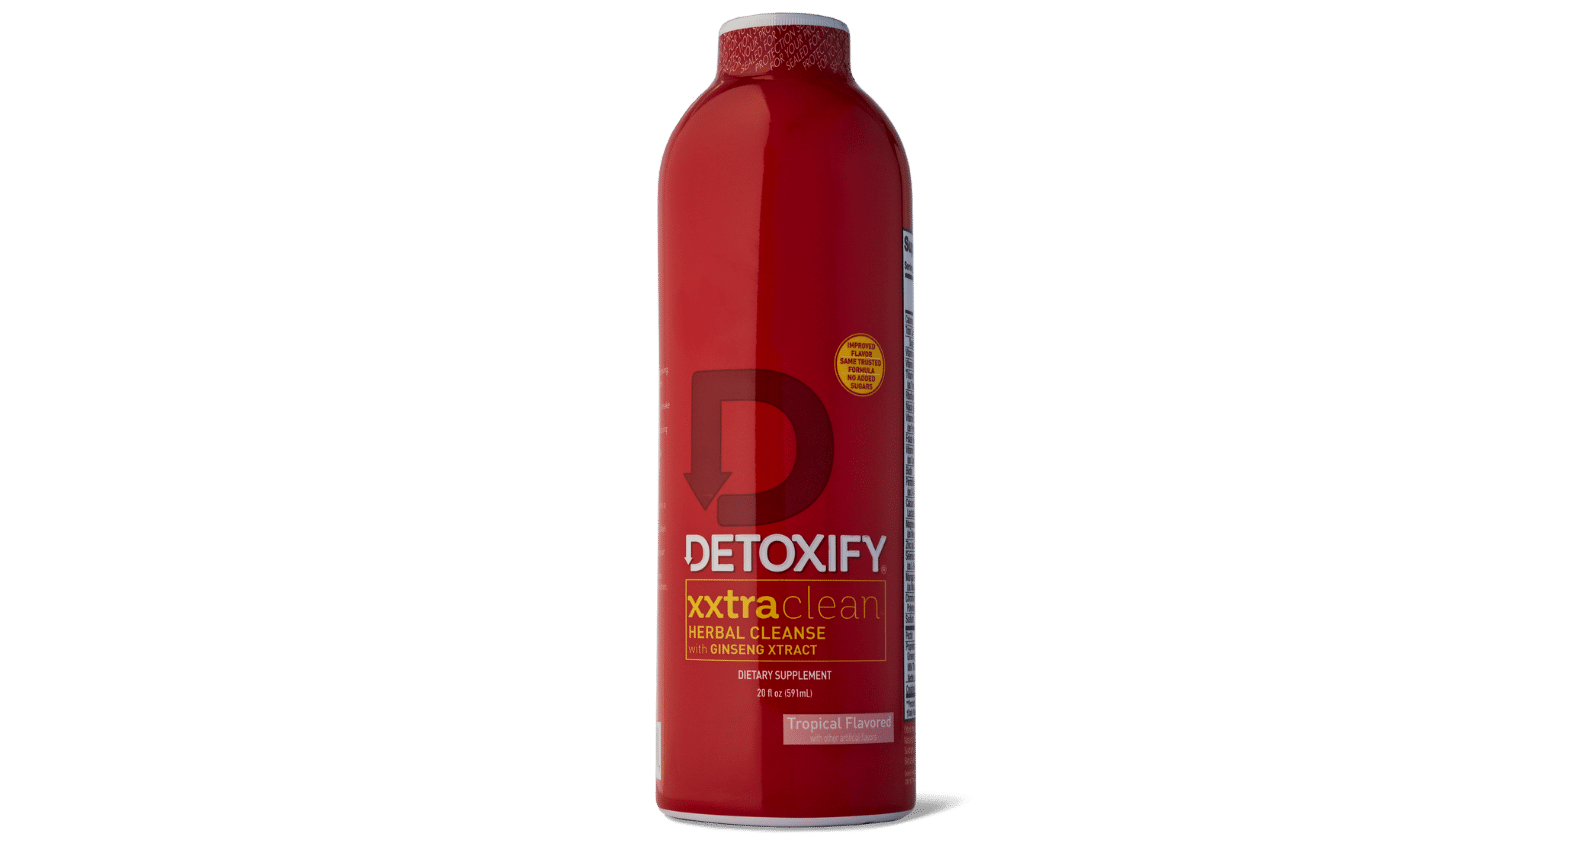 Detoxify XXtra Clean supports healthy, sustained energy, while reducing feelings of stress and improving mood. 